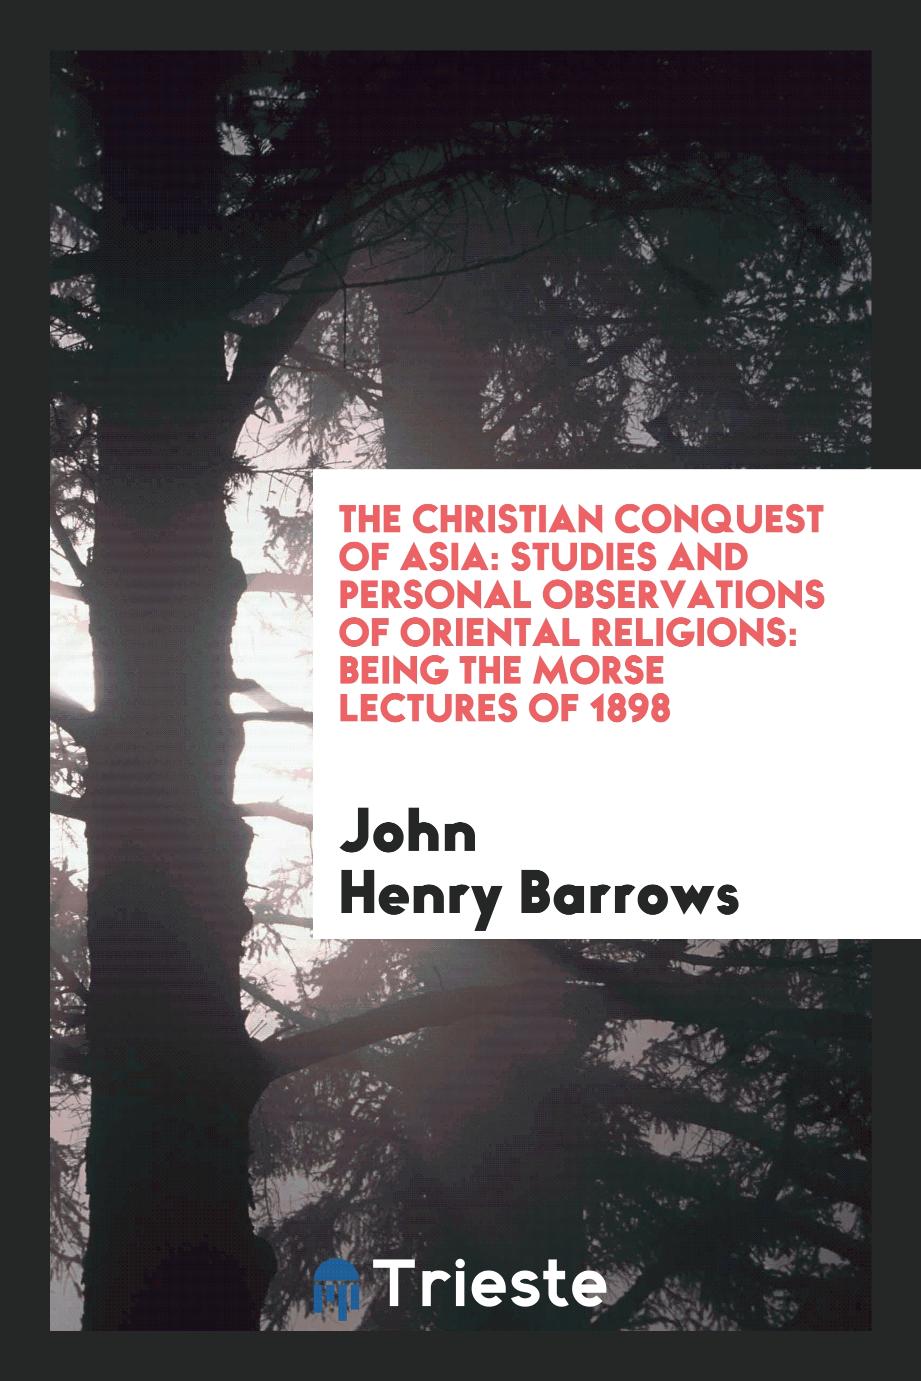 The Christian conquest of Asia: studies and personal observations of oriental religions: being the Morse lectures of 1898